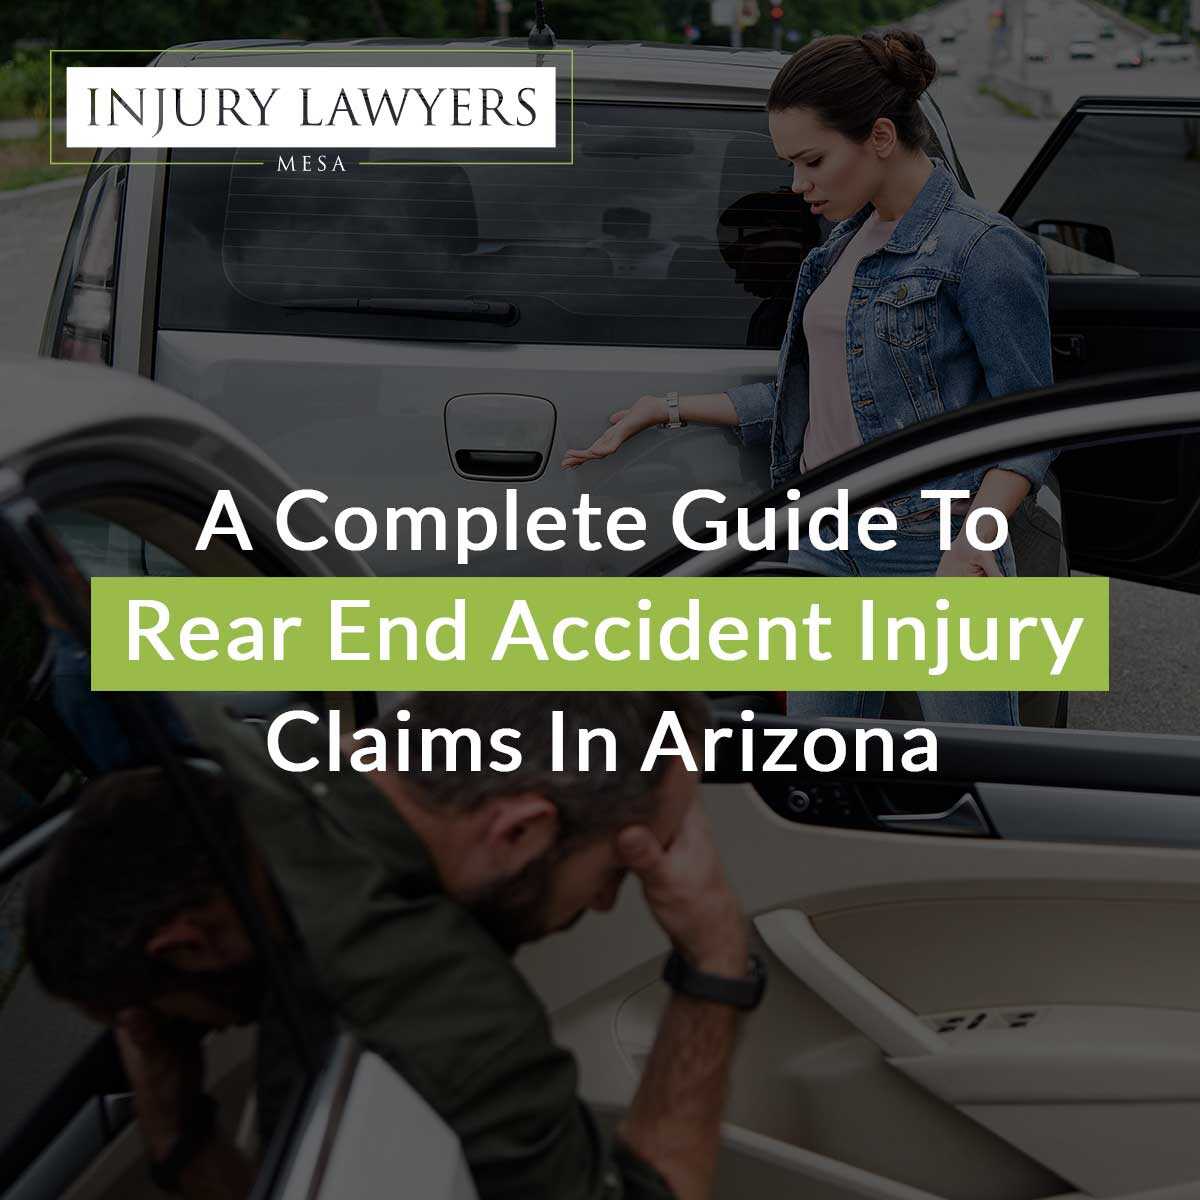 A Complete Guide to Rear End Accident Injury Claims In Arizona